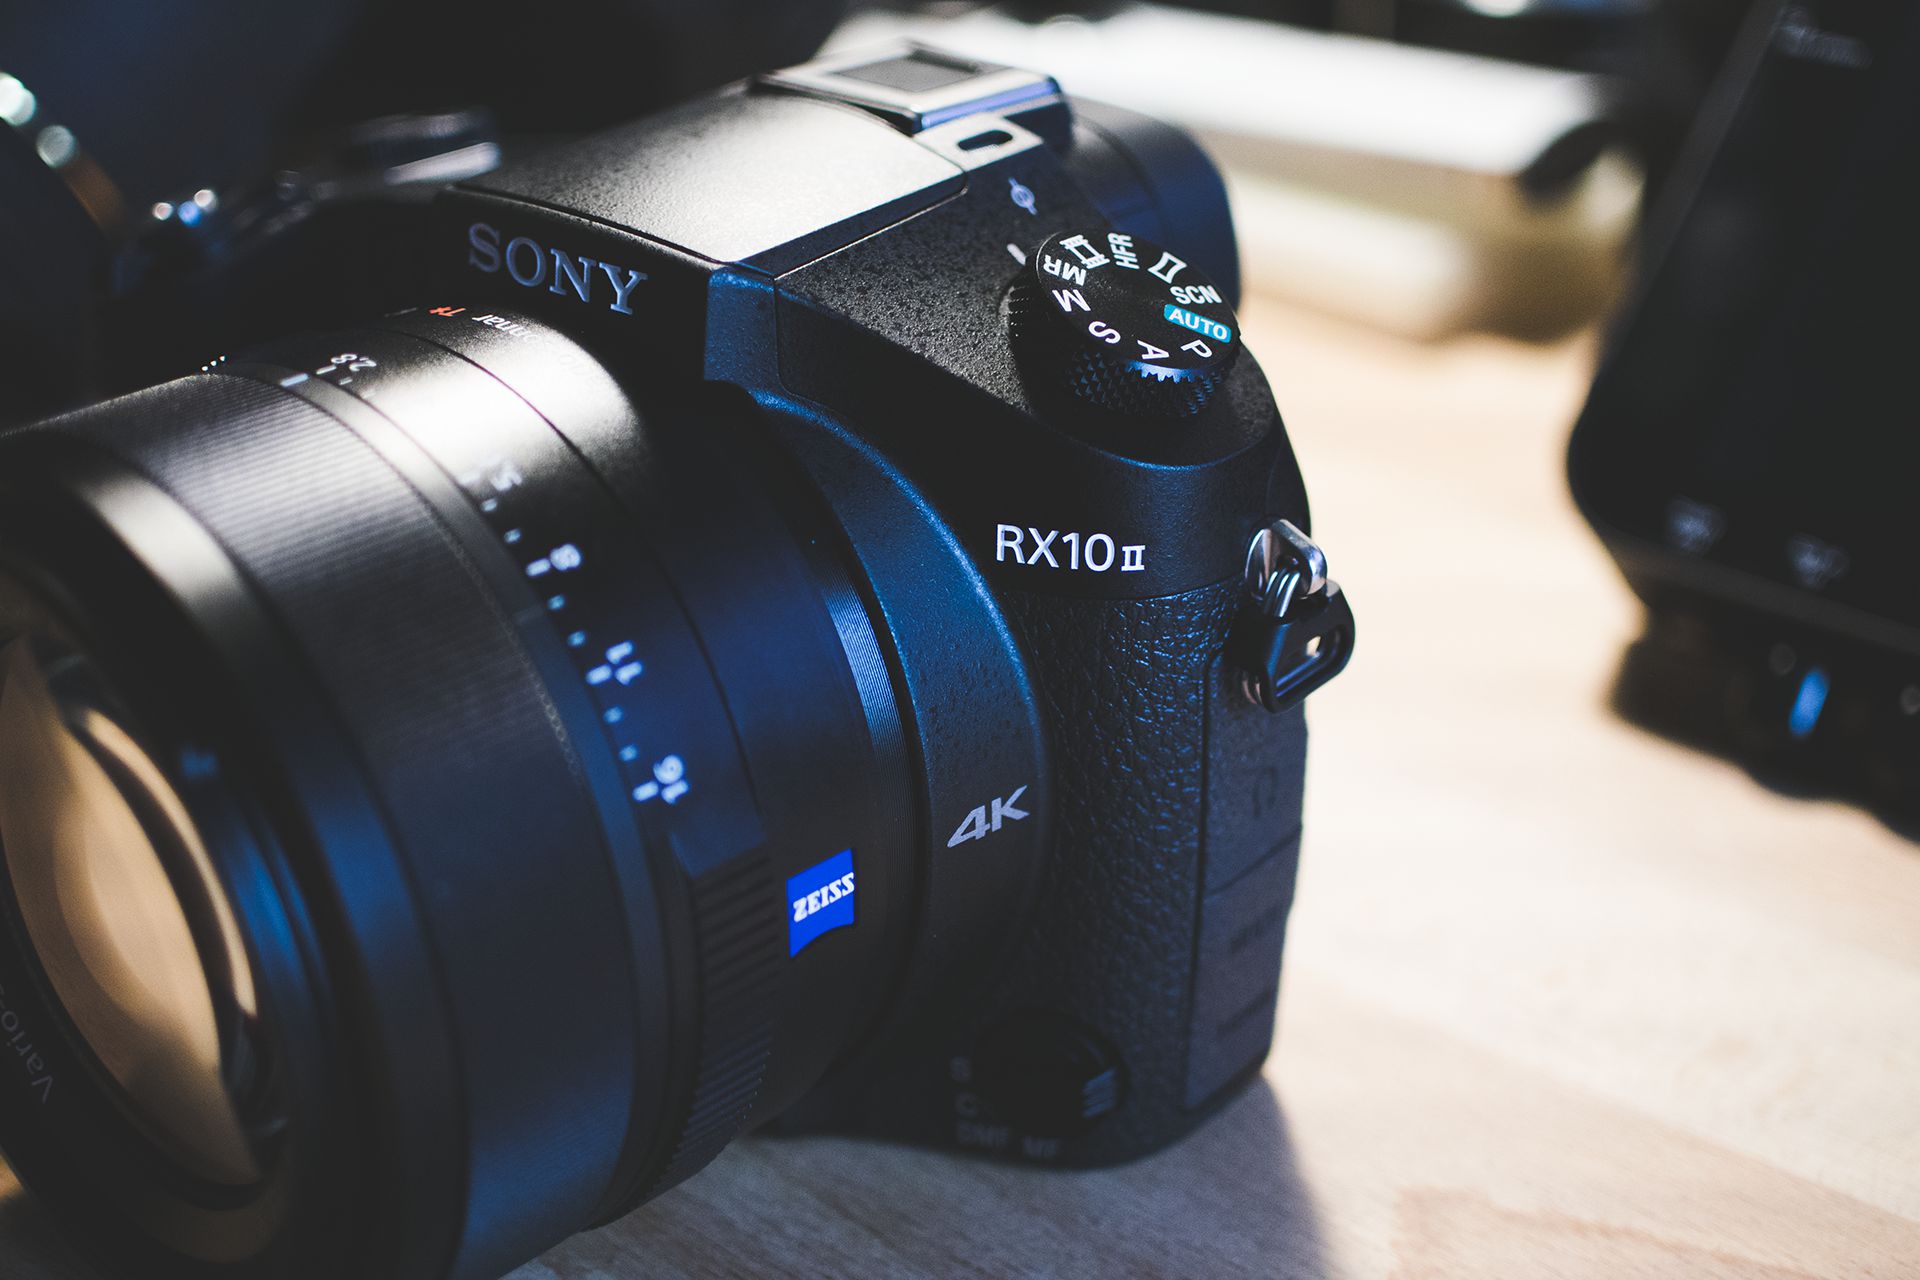 Sony RX10 II review final conclusion and introduction to its smaller brother, IV - EOSHD.com - Filmmaking Gear and Camera Reviews